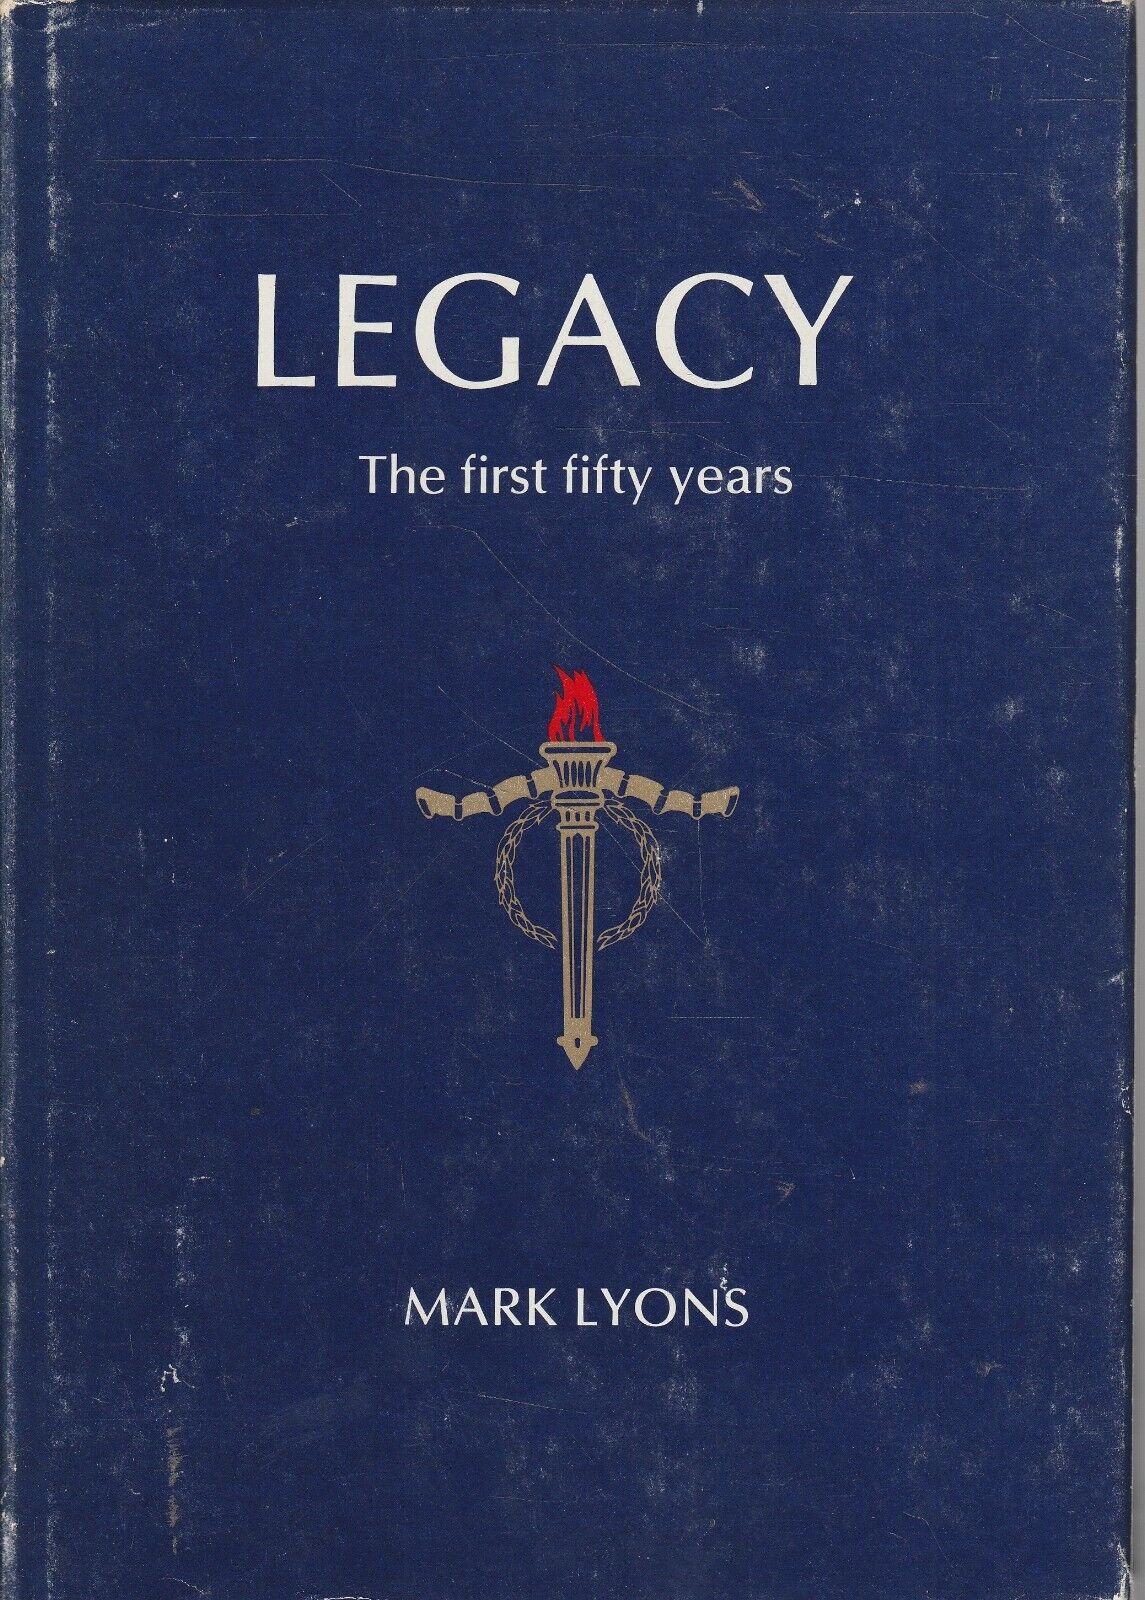 Legacy: The first fifty years